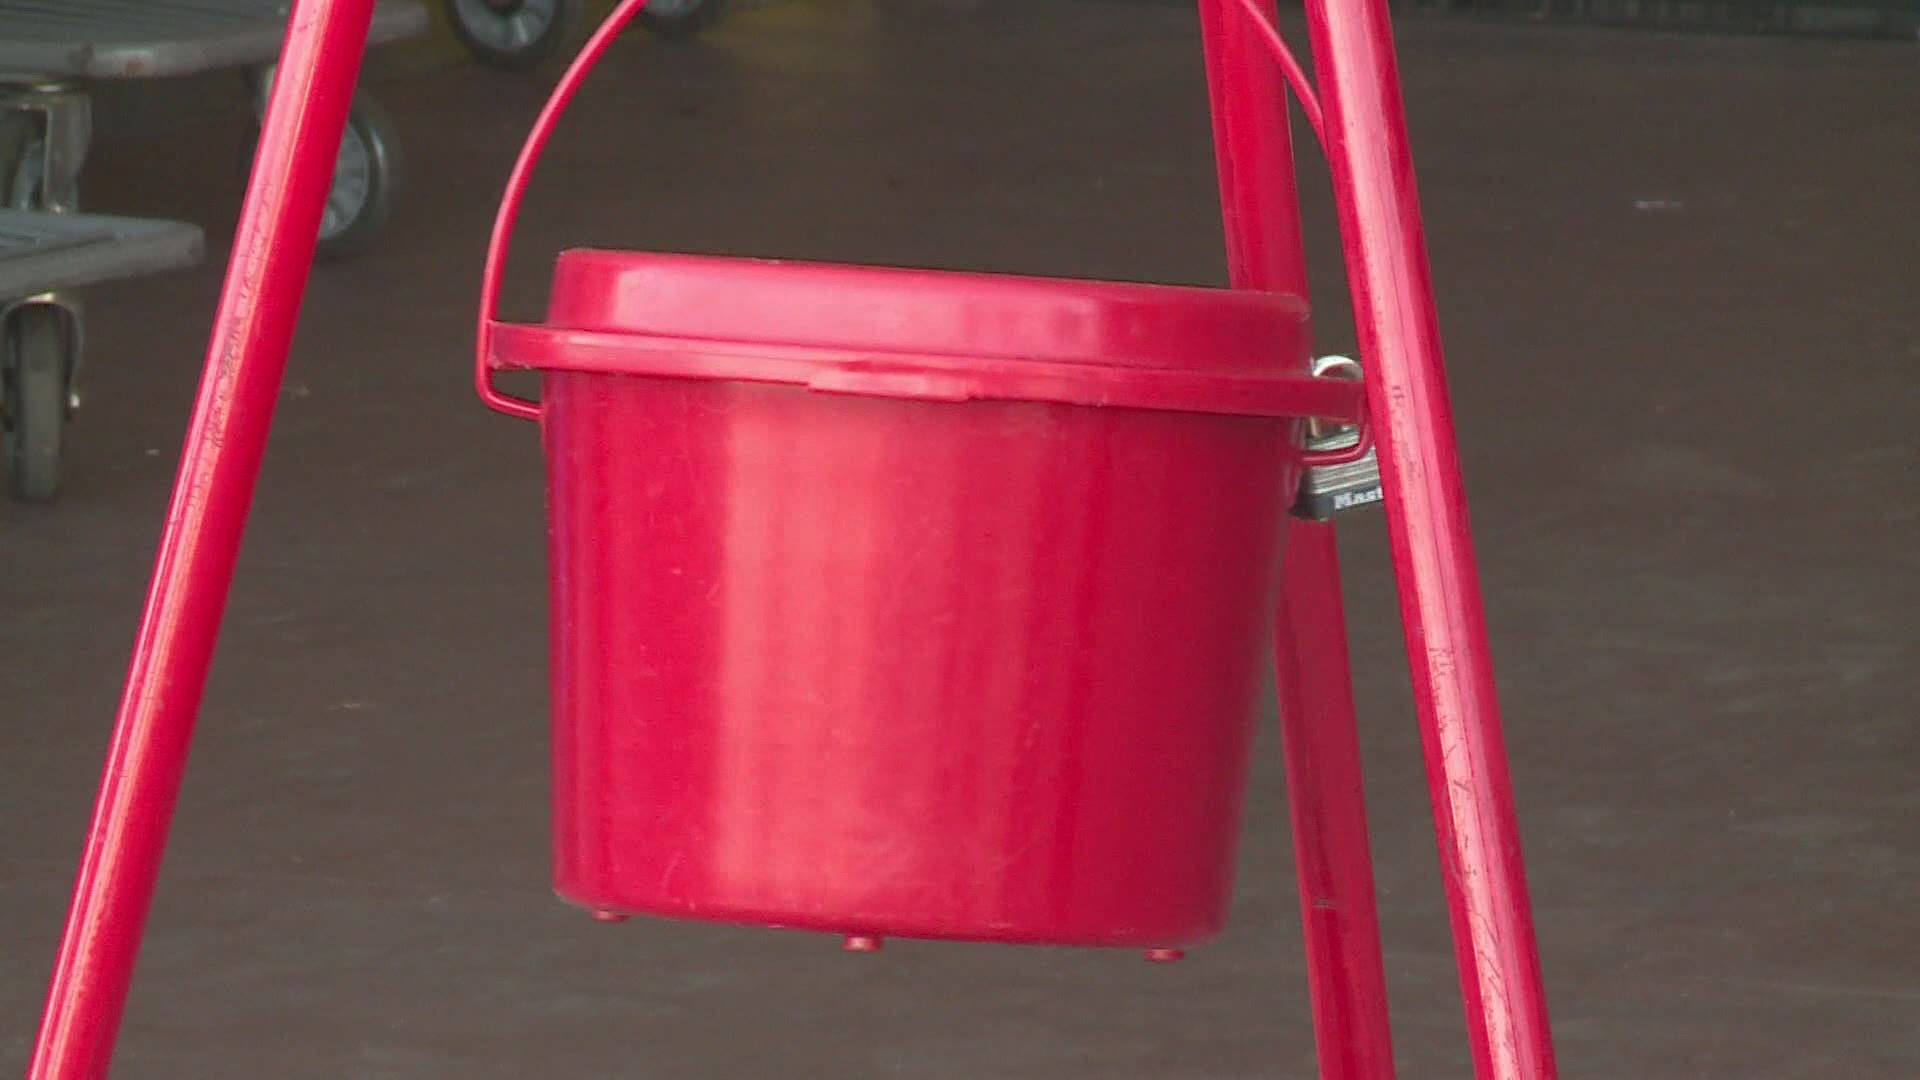 The Salvation Army getting ready to begin annual Christmas Red Kettle  Campaign 